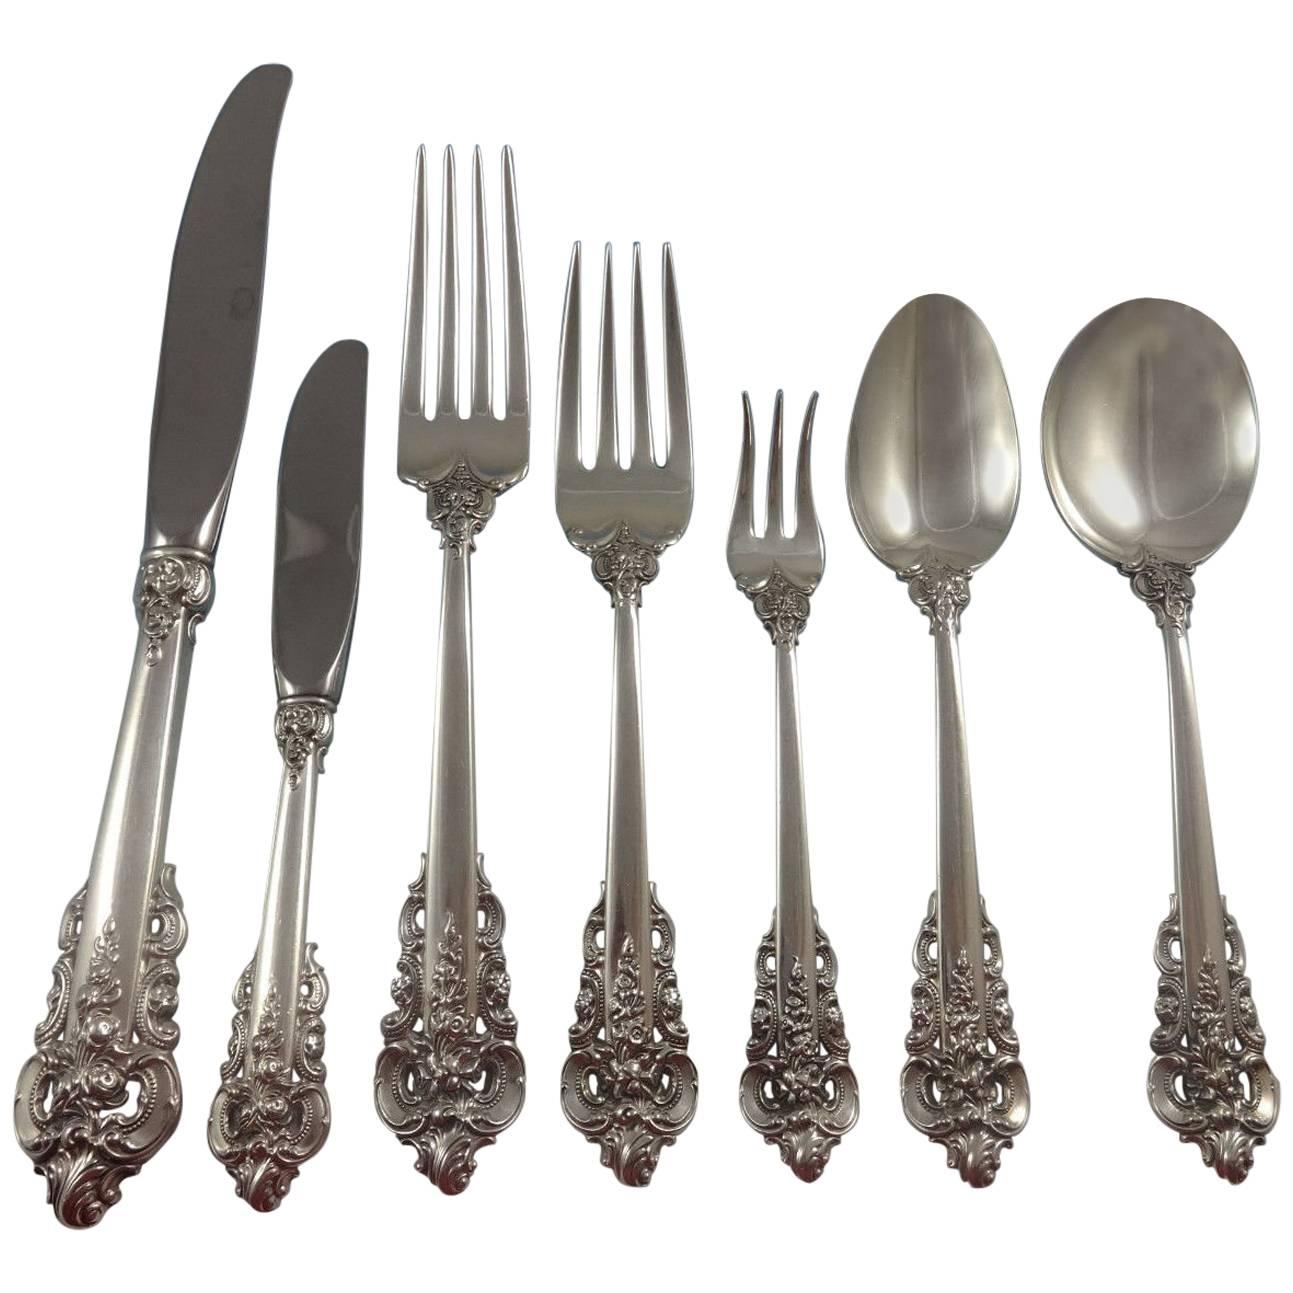 WALLACE STERLING PLACE FORK GRAND VICTORIAN -7 3//4/" S